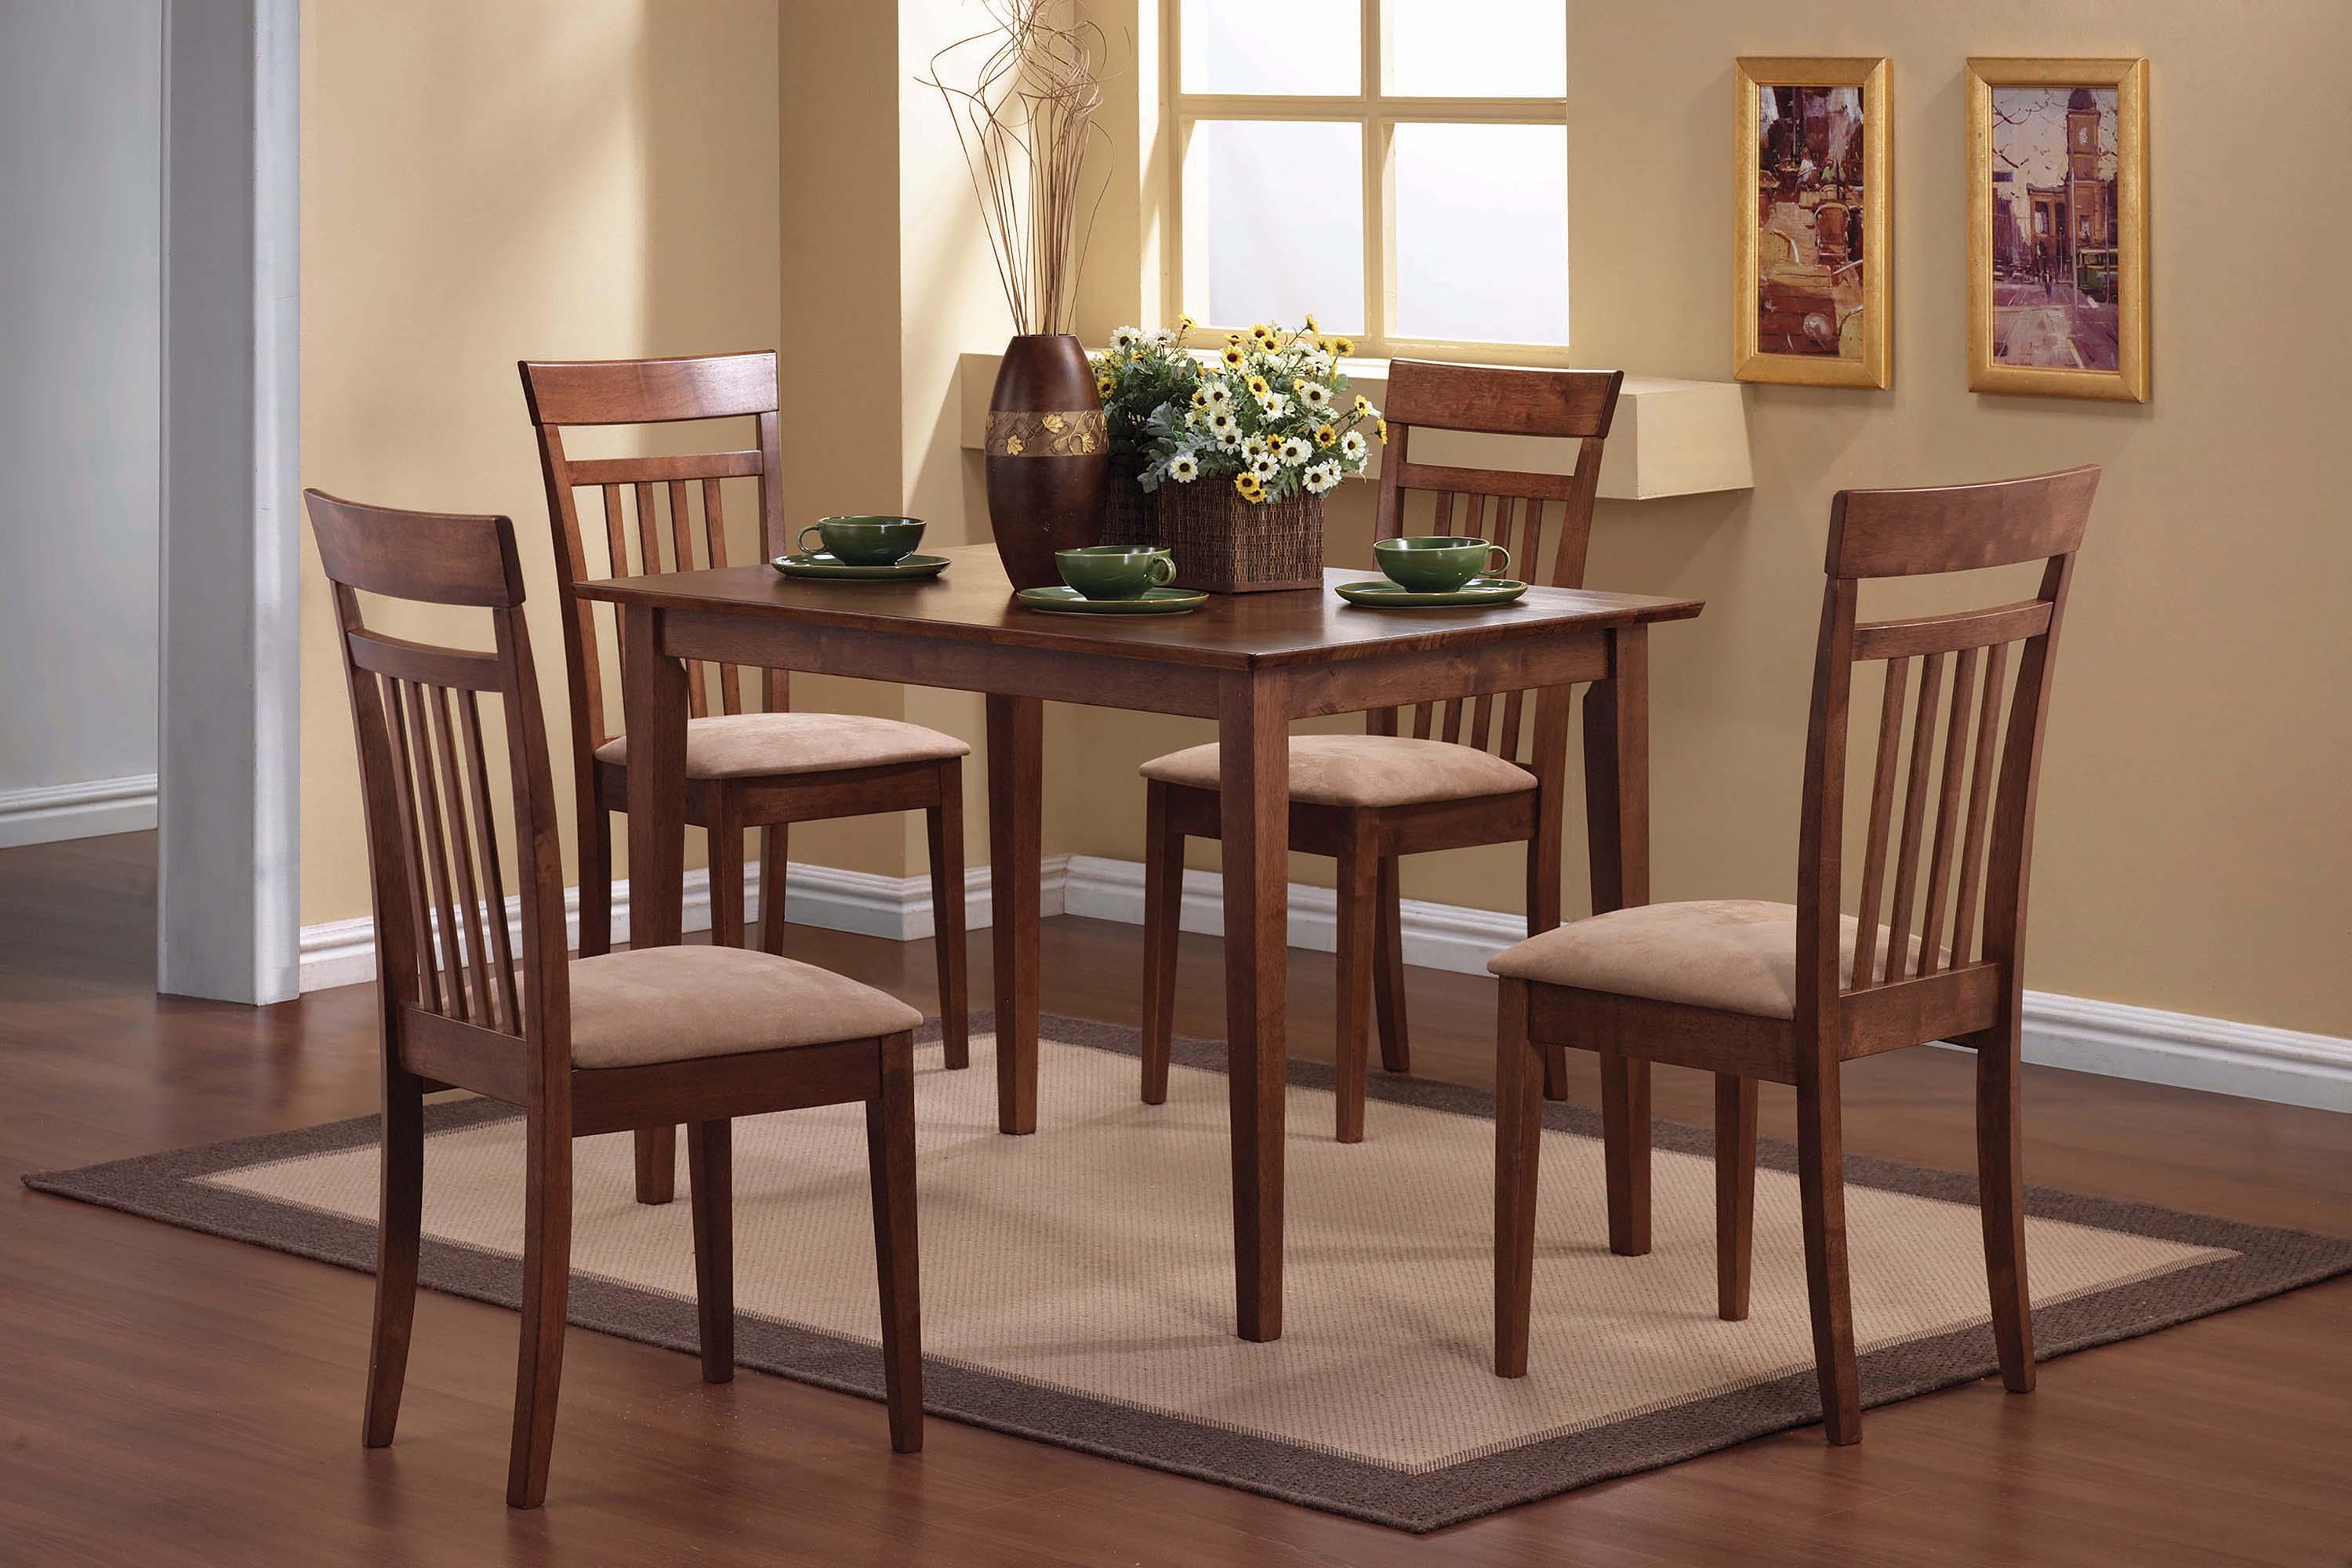 Contemporary Dining Sets Everyday 150430 150430 in Brown Fabric